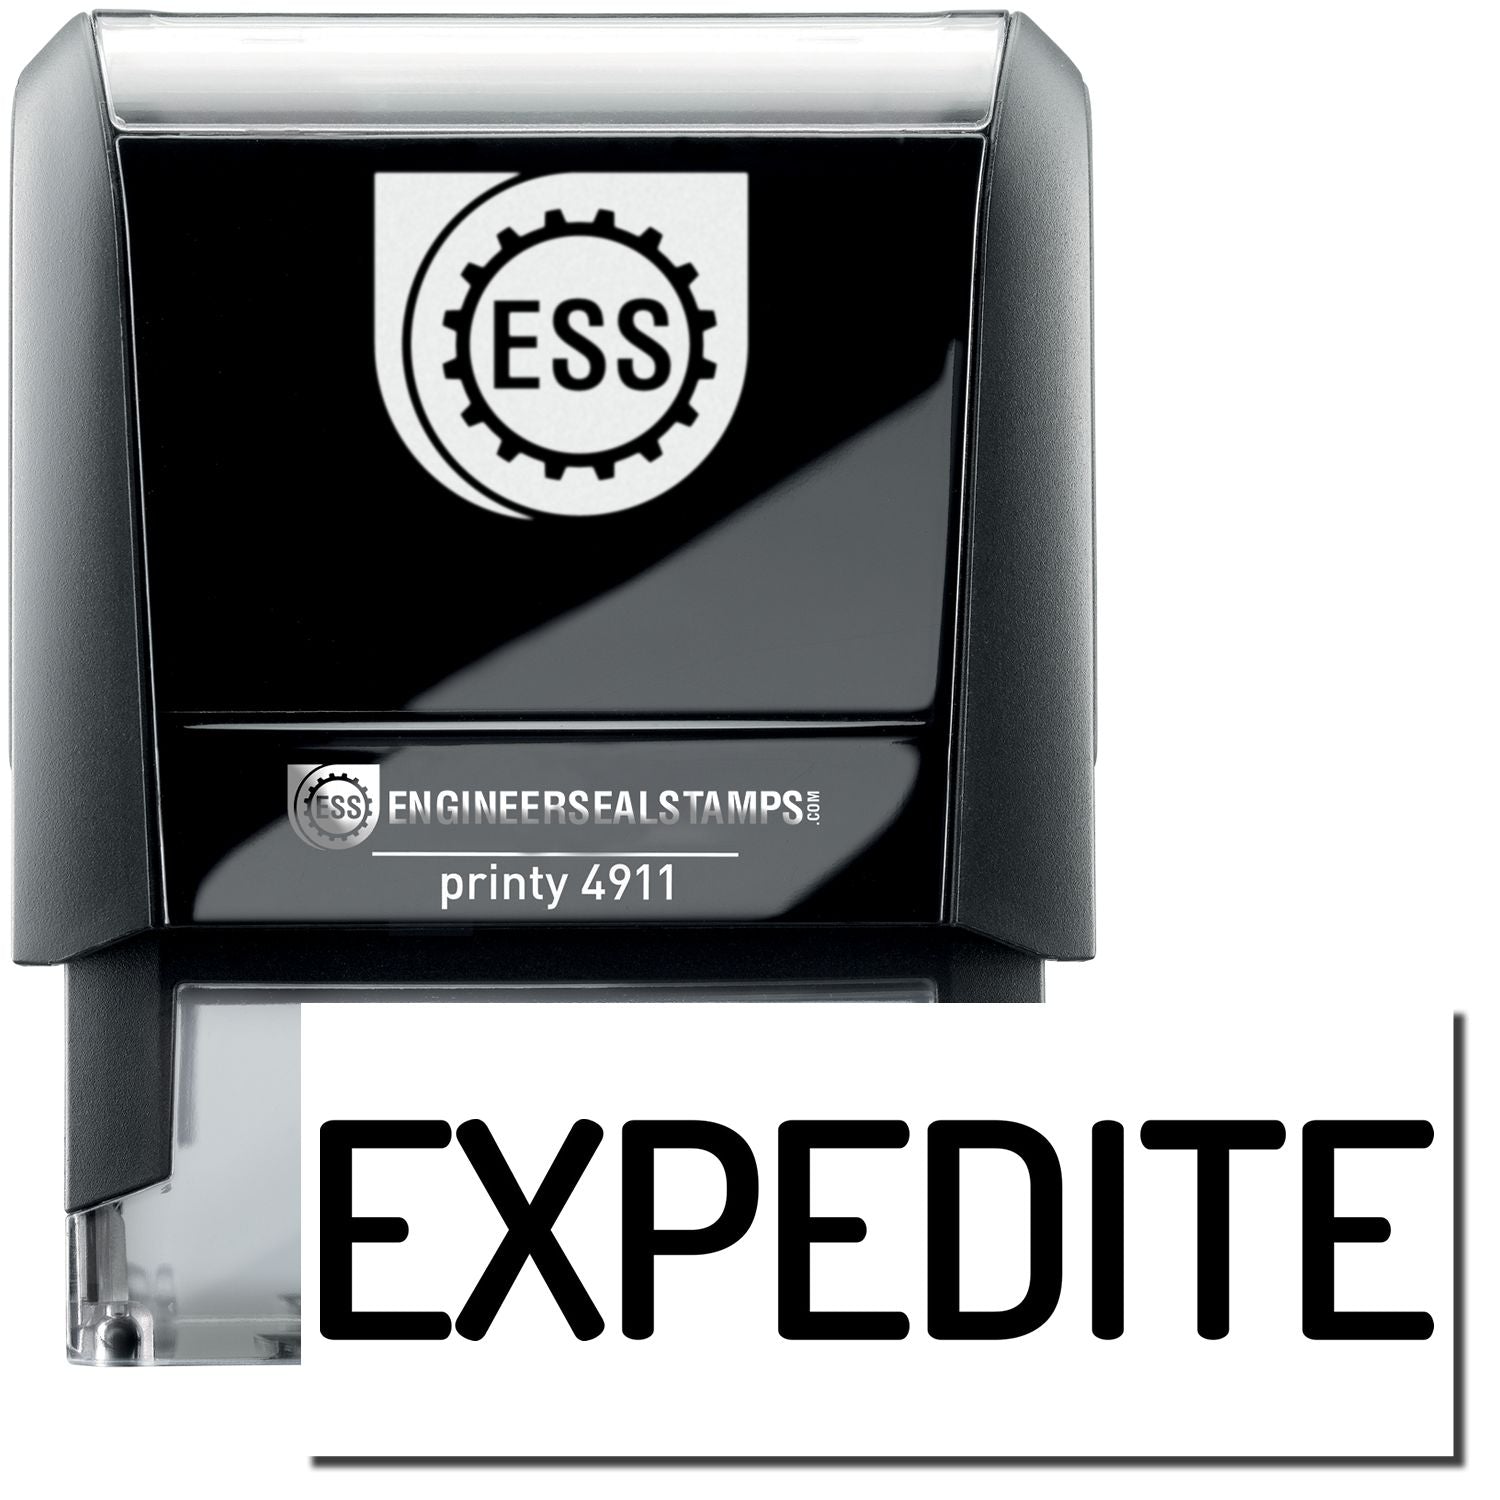 A self-inking stamp with a stamped image showing how the text "EXPEDITE" in a narrow font is displayed after stamping.